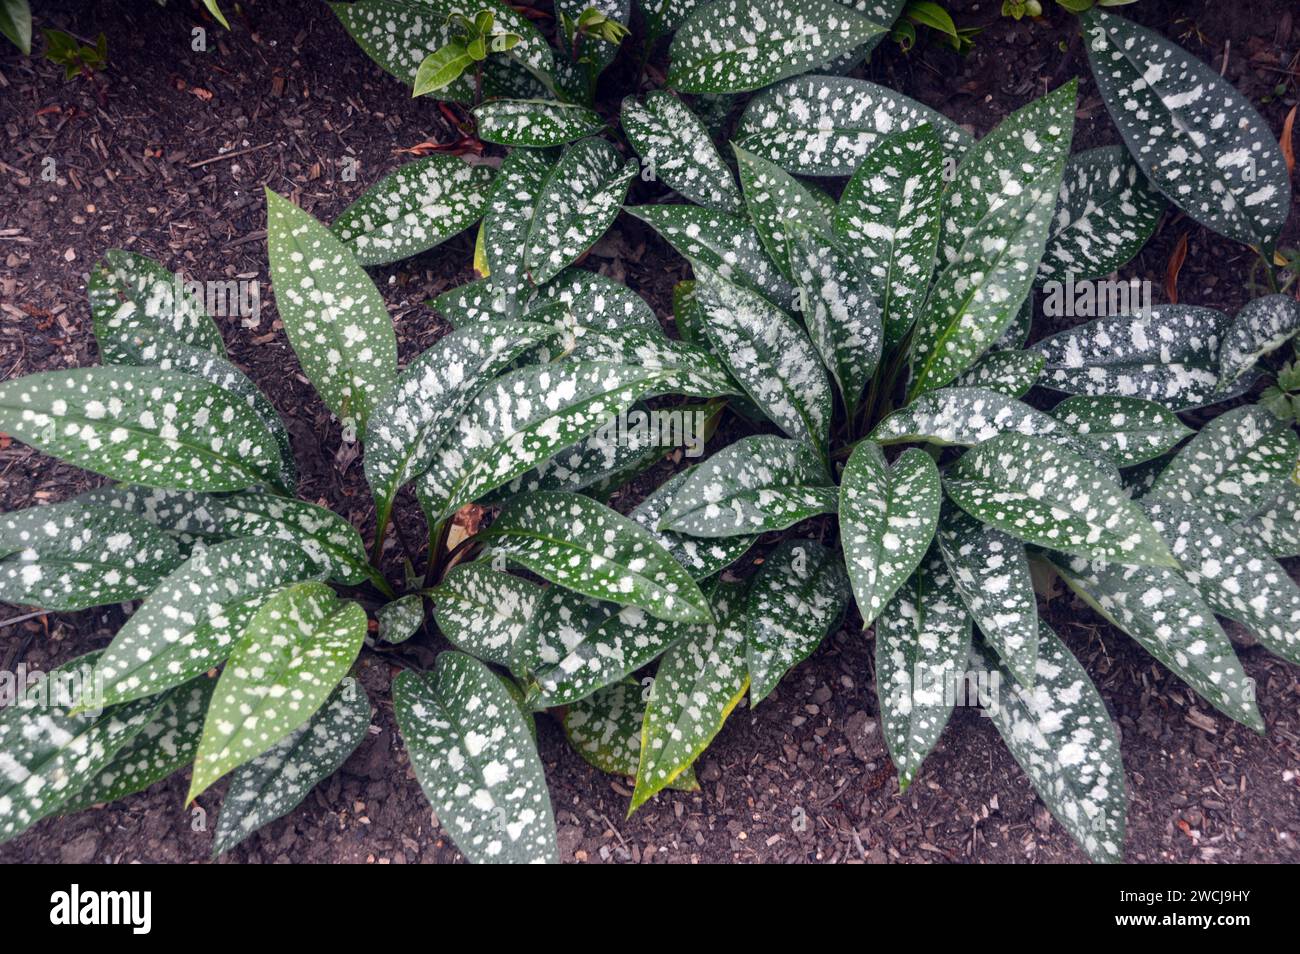 Marbled White Spotty Pulmonaria Saccharata (Bethlehem Lungwort) Leaves grown in the Borders at RHS Garden Harlow Carr, Harrogate, Yorkshire, England. Stock Photo